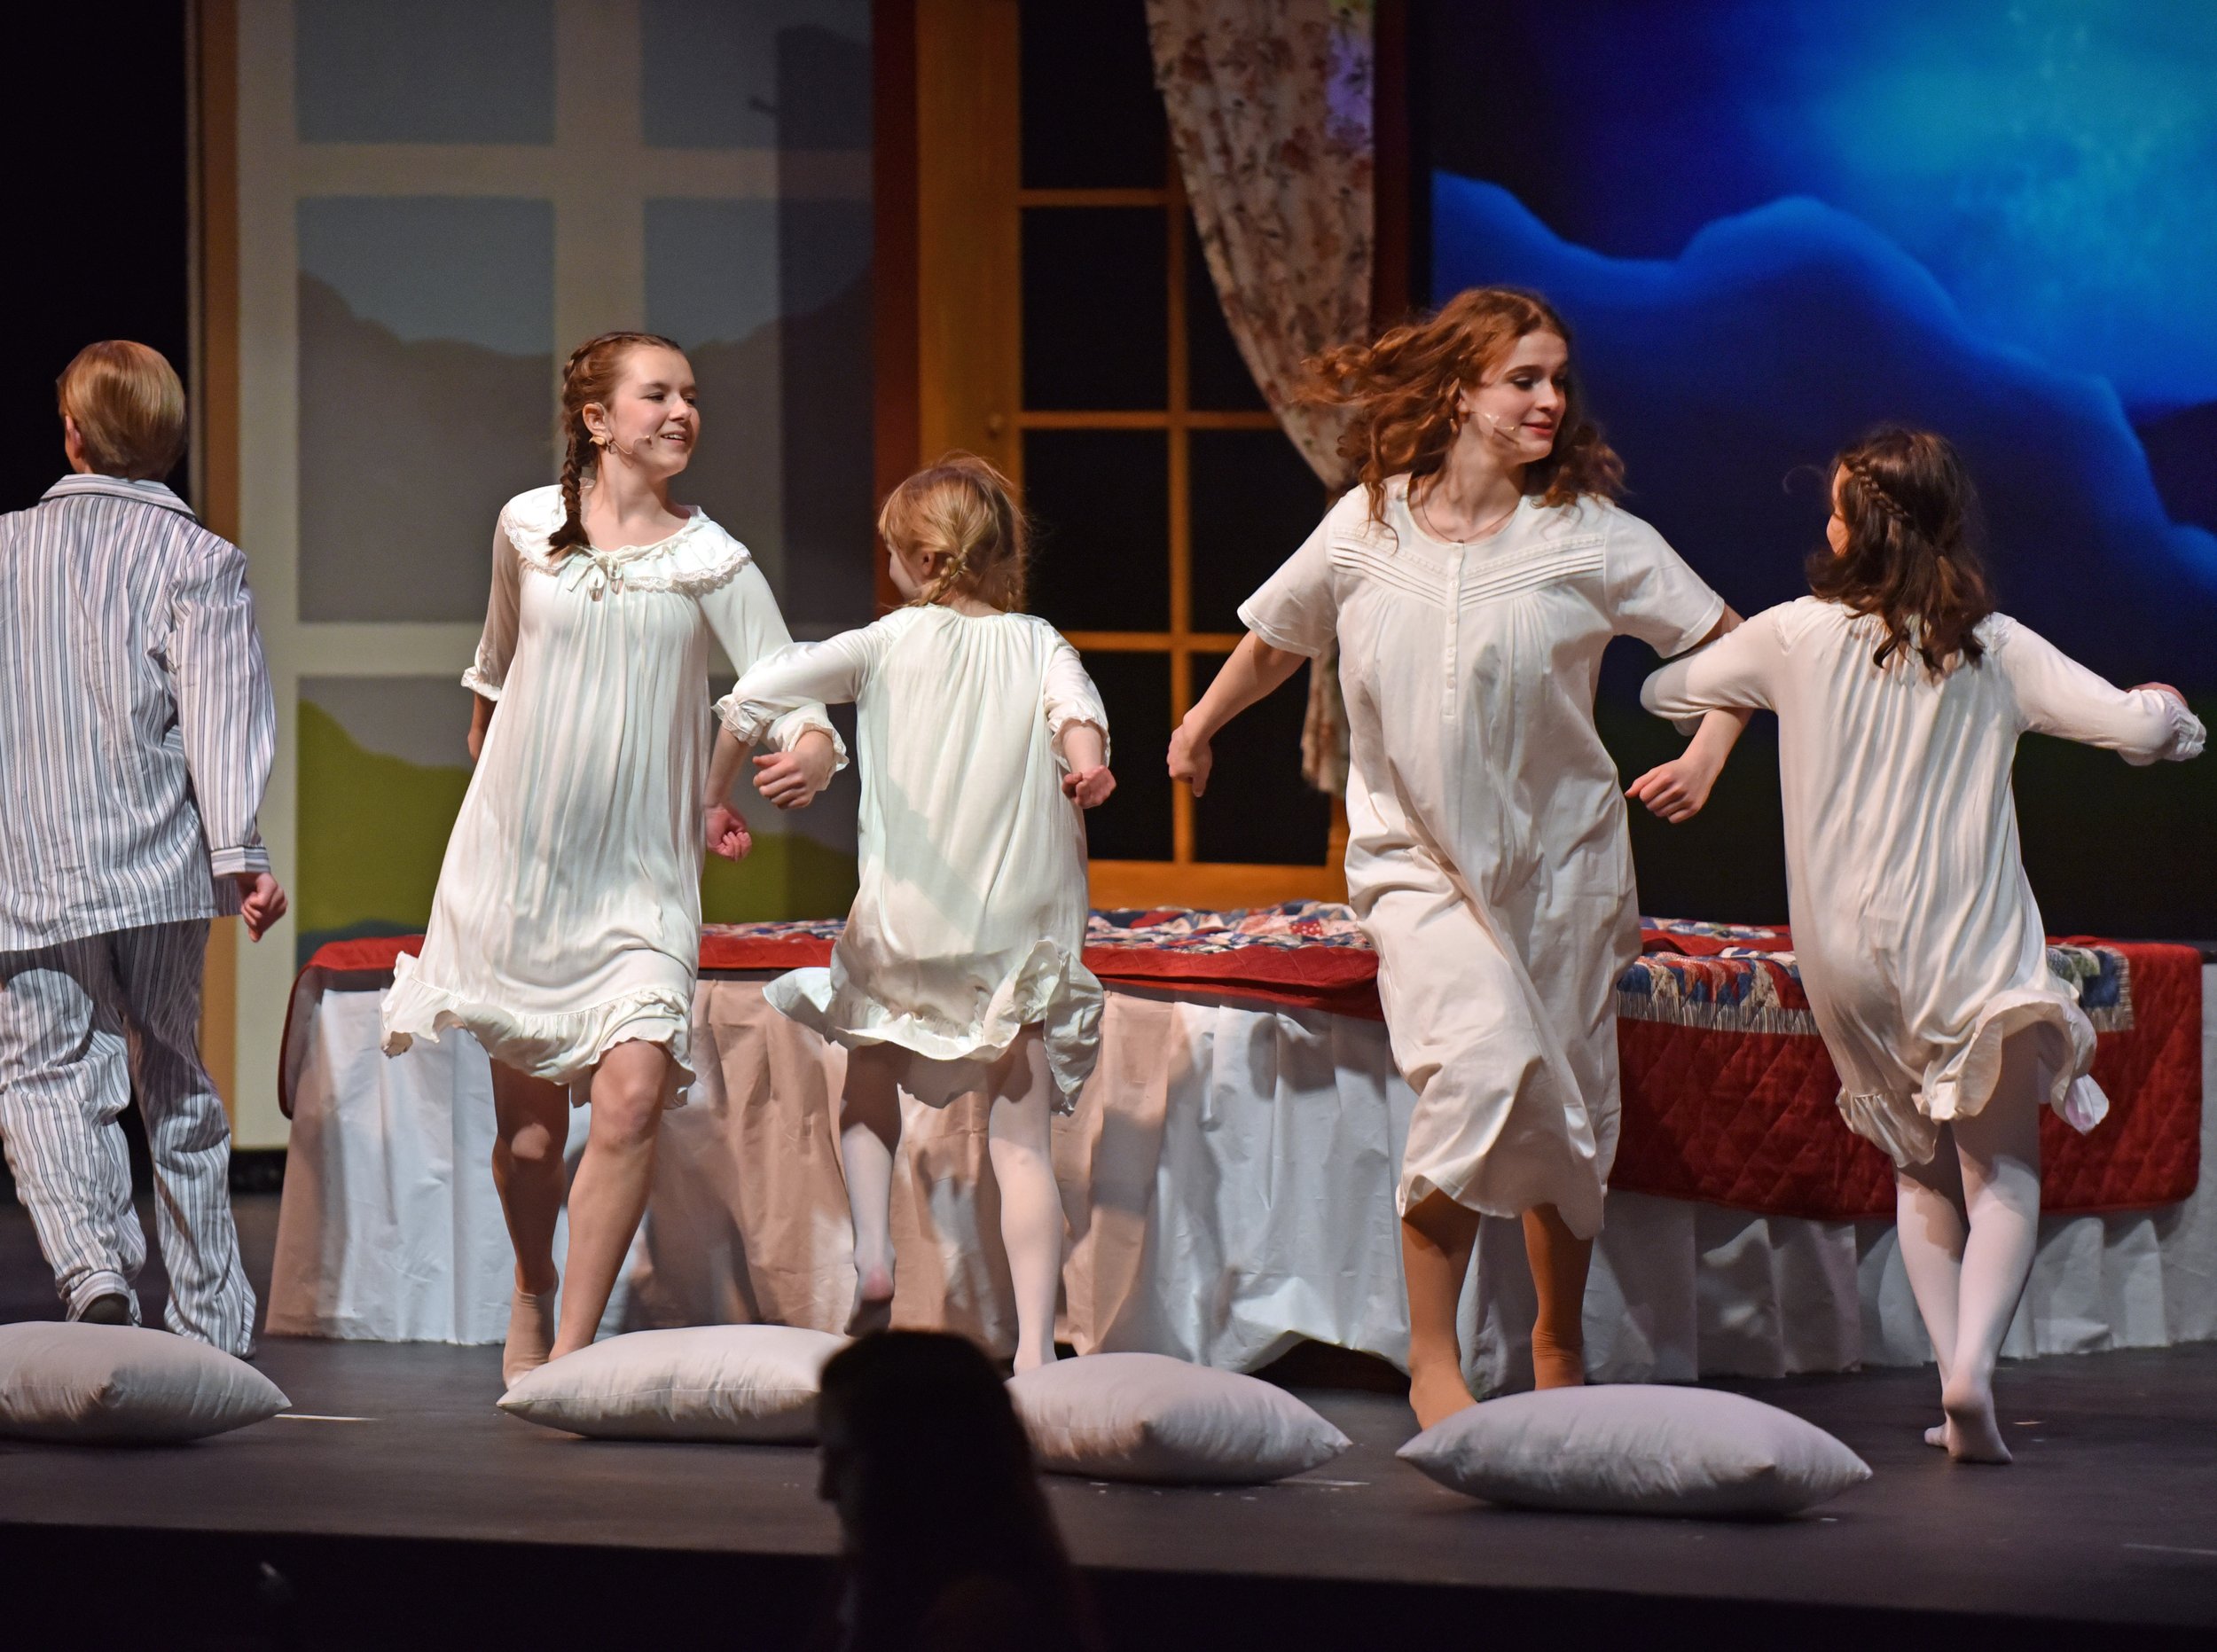  The Von Trapp children are cast by Harwood MS/HS, Crossett Brook Middle School and Waitsfield Elementary students. Photo by Gordon Miller 